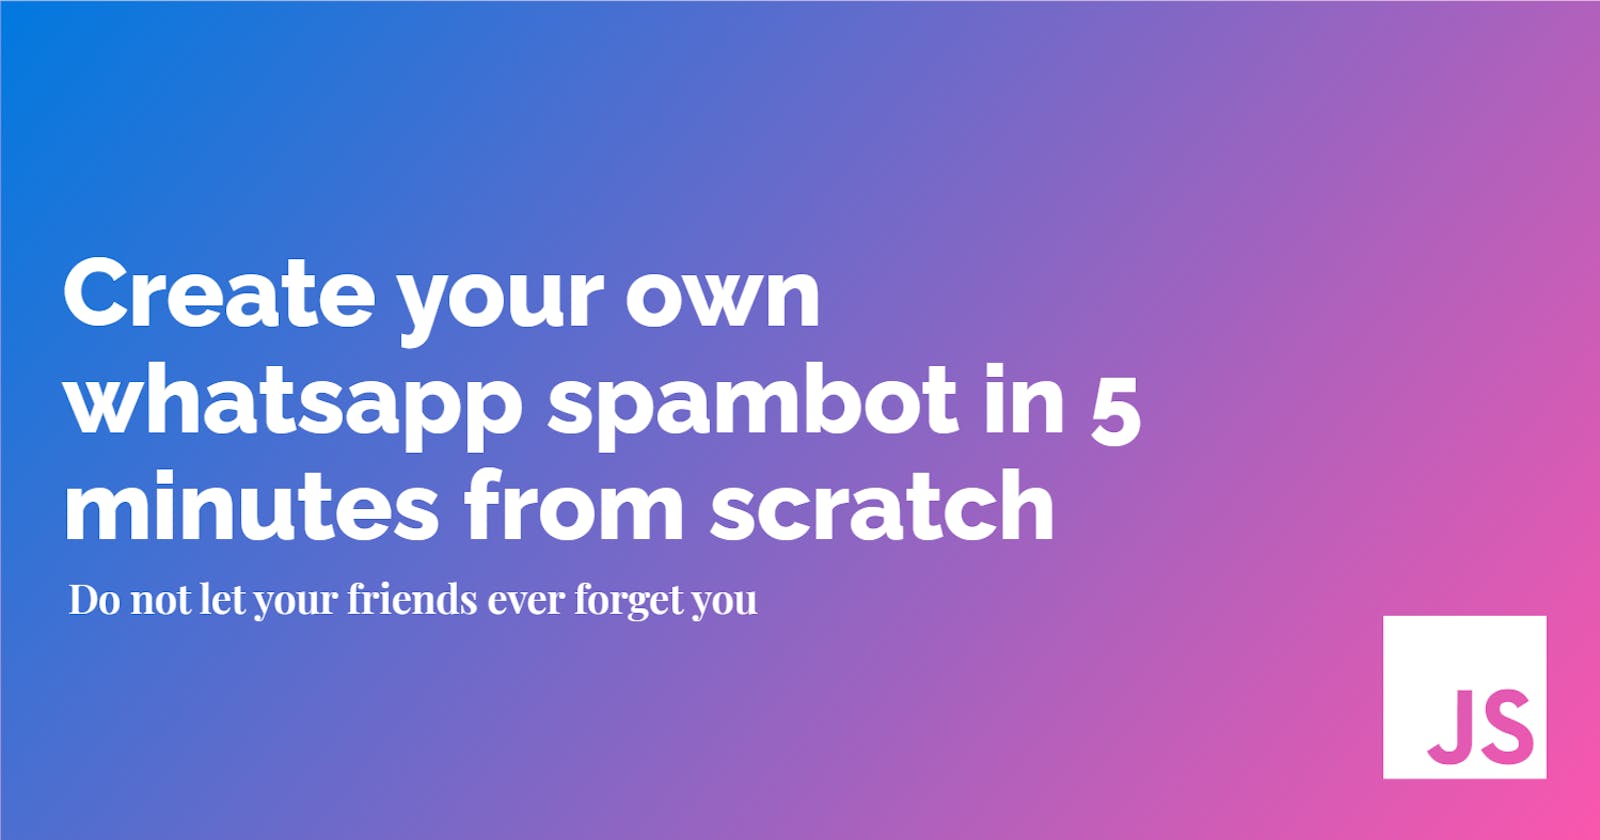 Create Your Own WhatsApp Spambot in 5 Minutes from Scratch